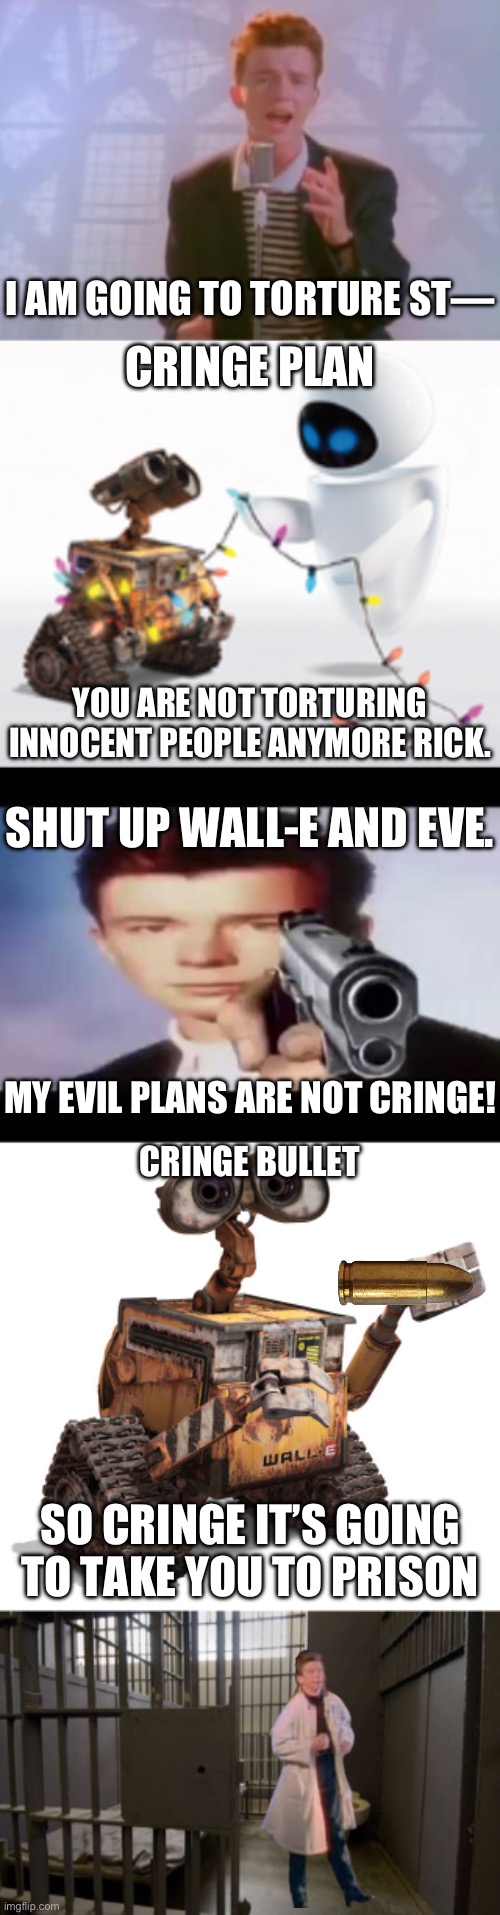 I AM GOING TO TORTURE ST—; CRINGE PLAN; YOU ARE NOT TORTURING INNOCENT PEOPLE ANYMORE RICK. SHUT UP WALL-E AND EVE. MY EVIL PLANS ARE NOT CRINGE! CRINGE BULLET; SO CRINGE IT’S GOING TO TAKE YOU TO PRISON | image tagged in rick astley,wall-e and eve,rick astley pointing at you,wall-e,jail cell | made w/ Imgflip meme maker